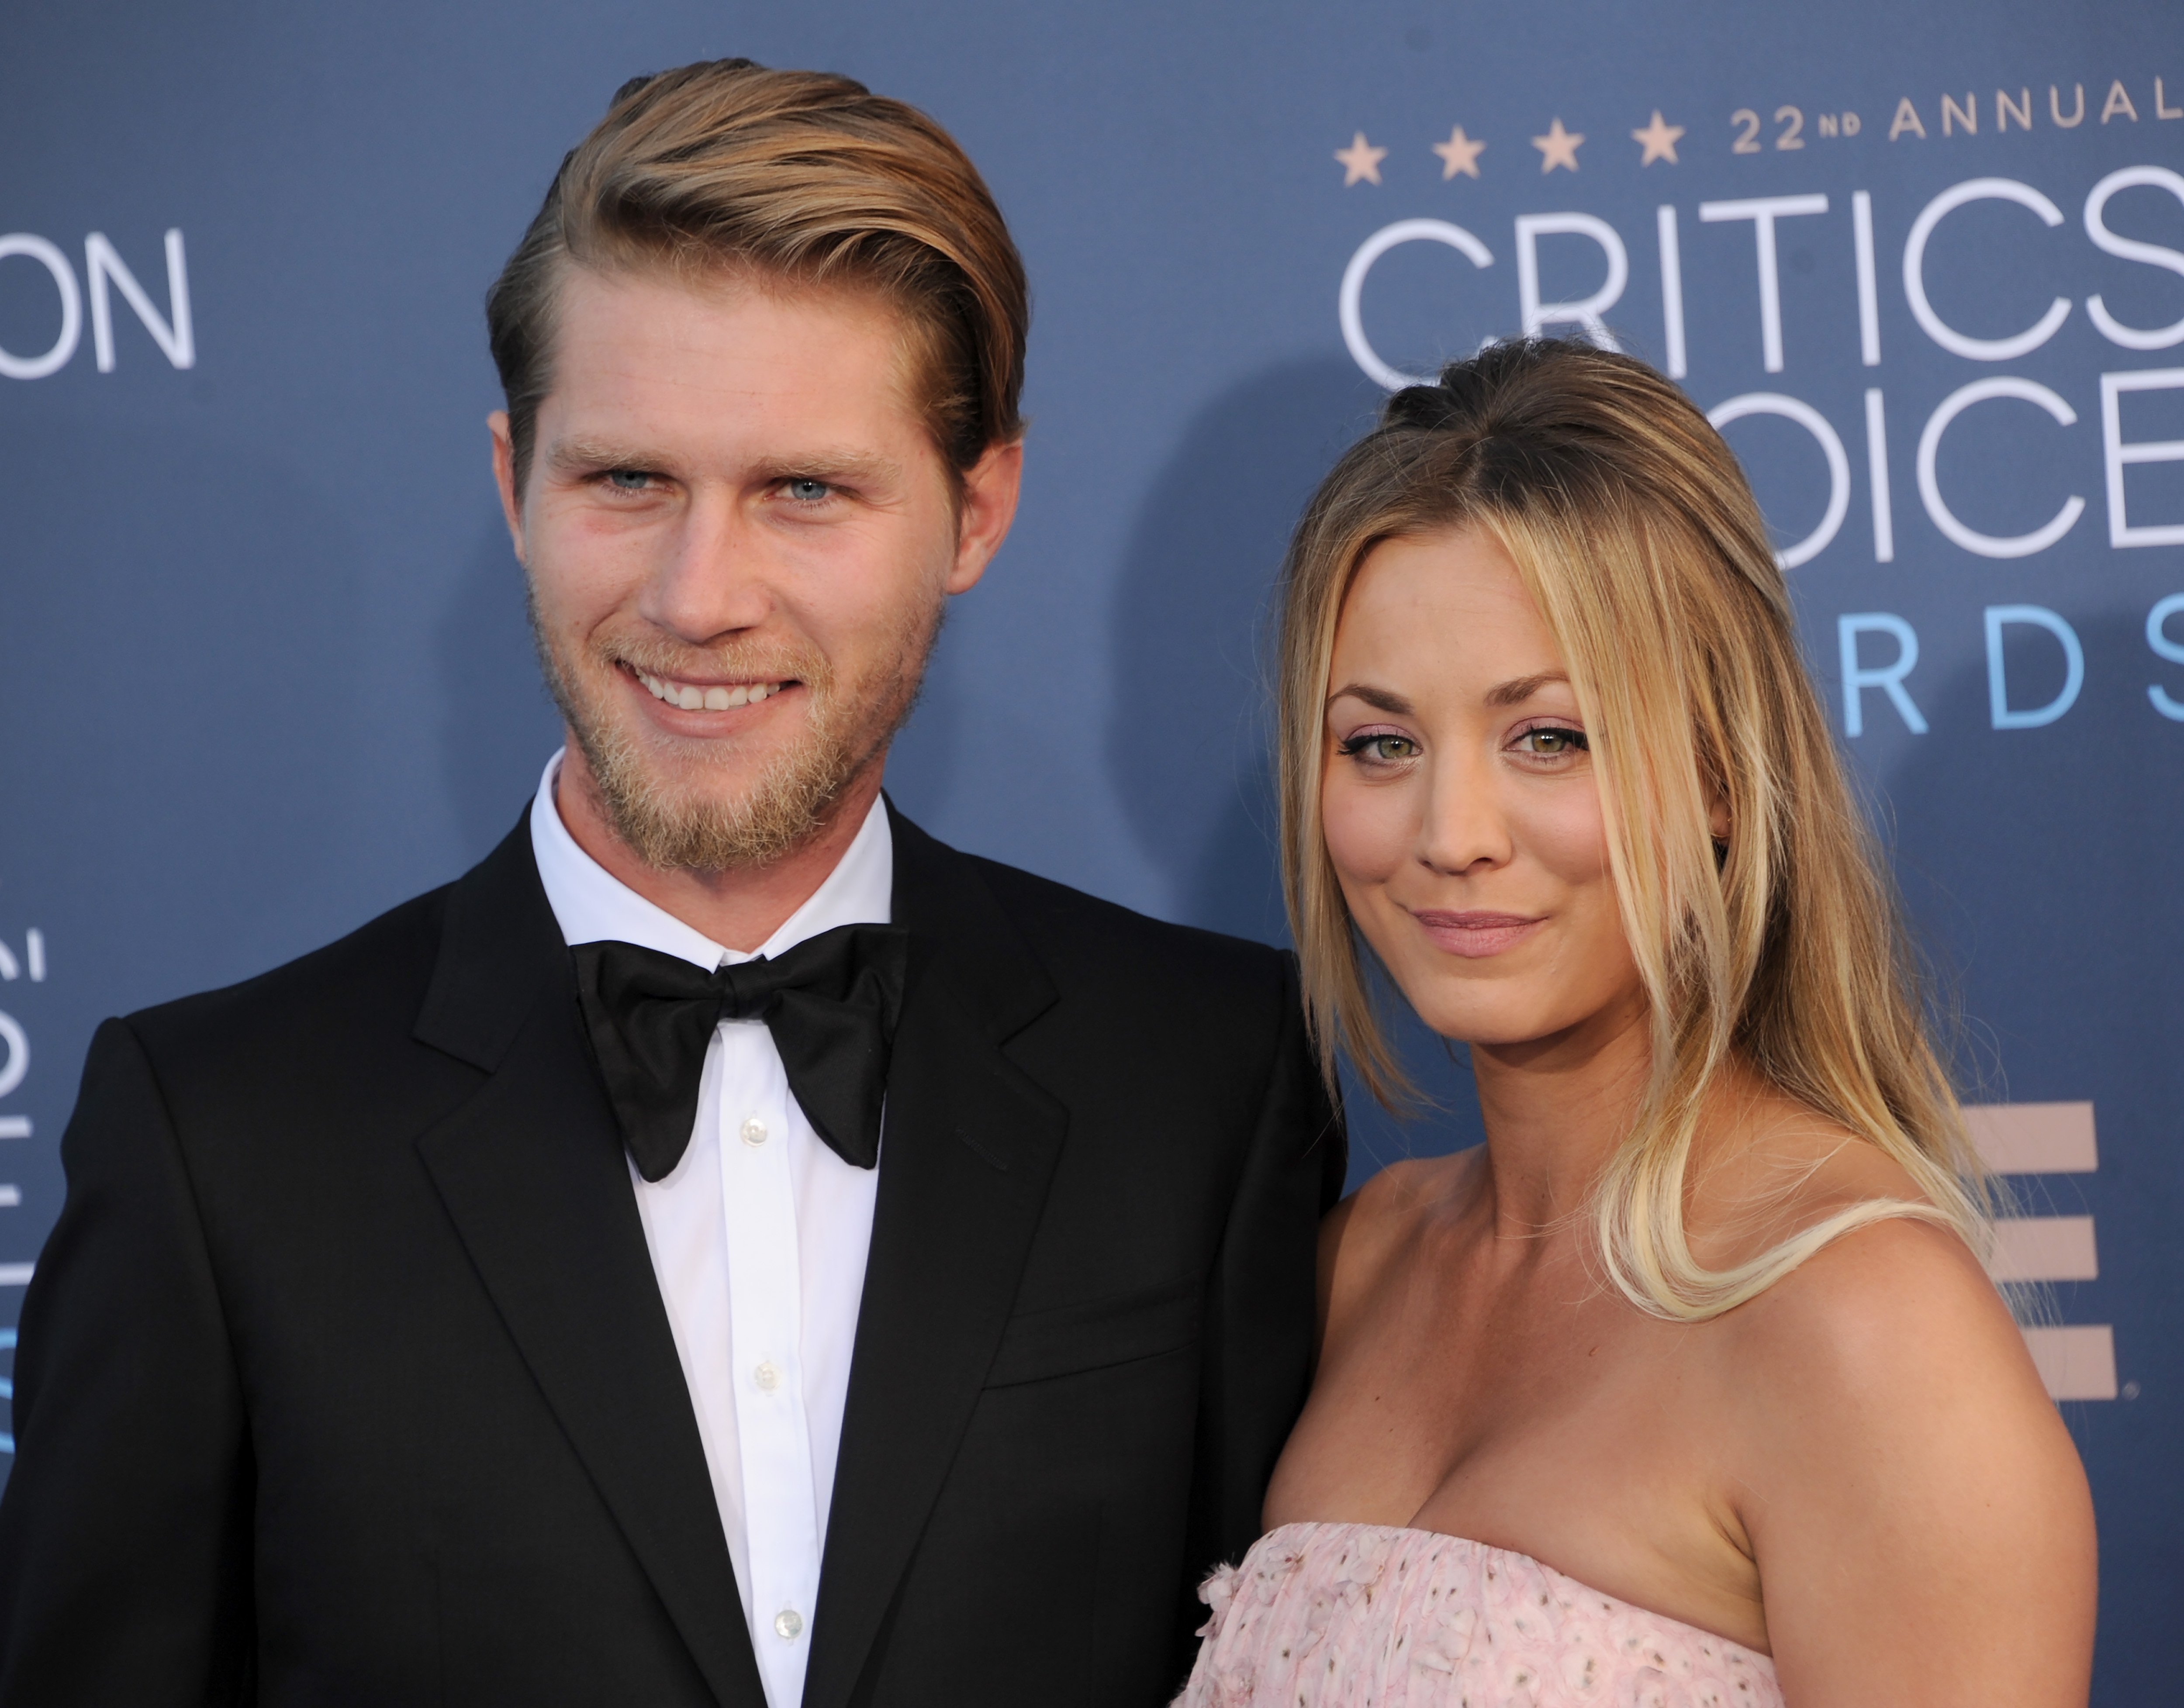 Kaley Cuoco and her husband, Karl Cook attending the "Critics Choice Awards" in Santa Barbara, in December, 2016. | Photo: Getty Images.